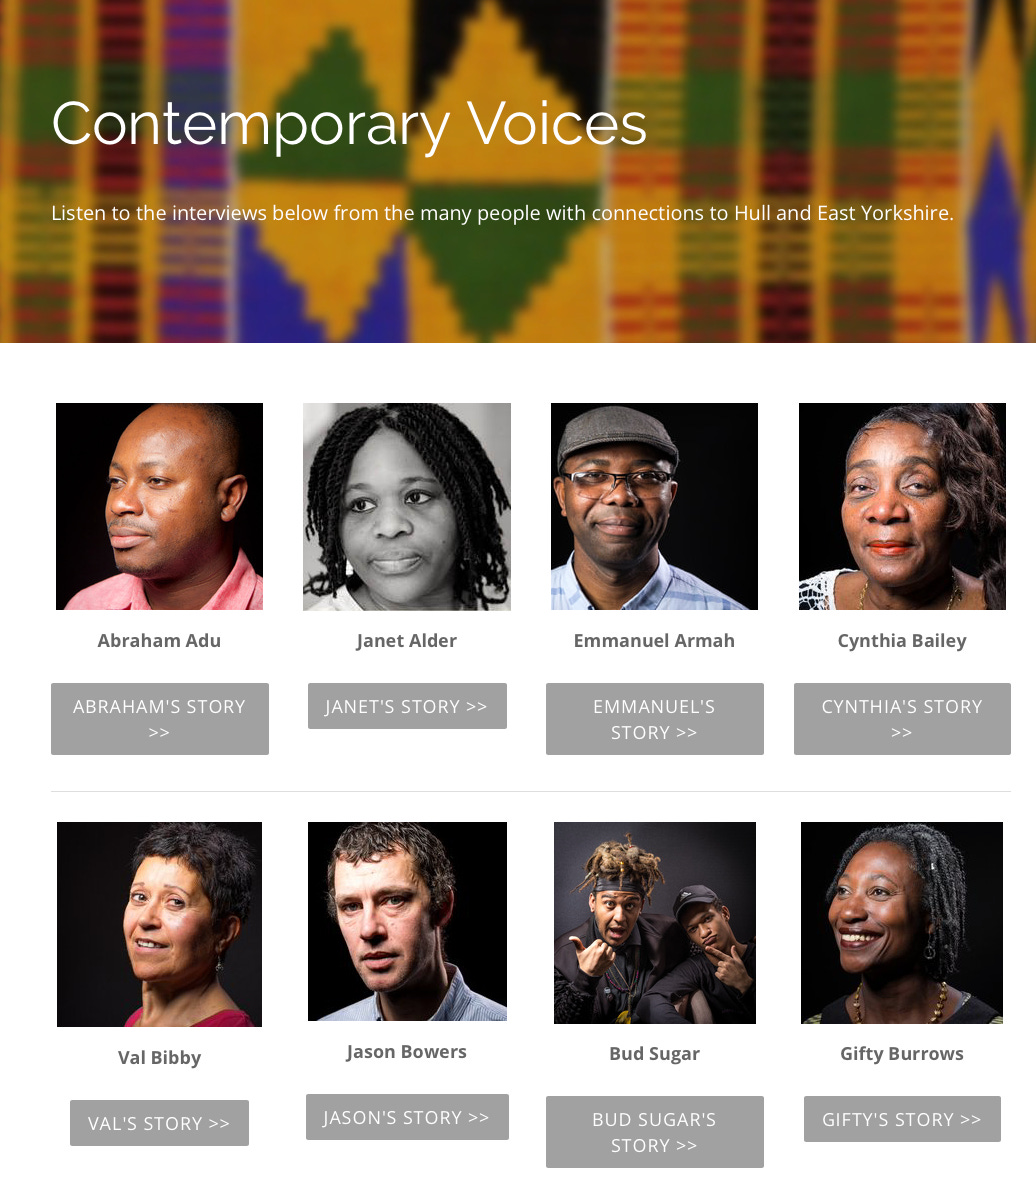 Contemporary Voices, Africans in Hull and East Yorkshire, portraits and interviews by Jerome Whittingham